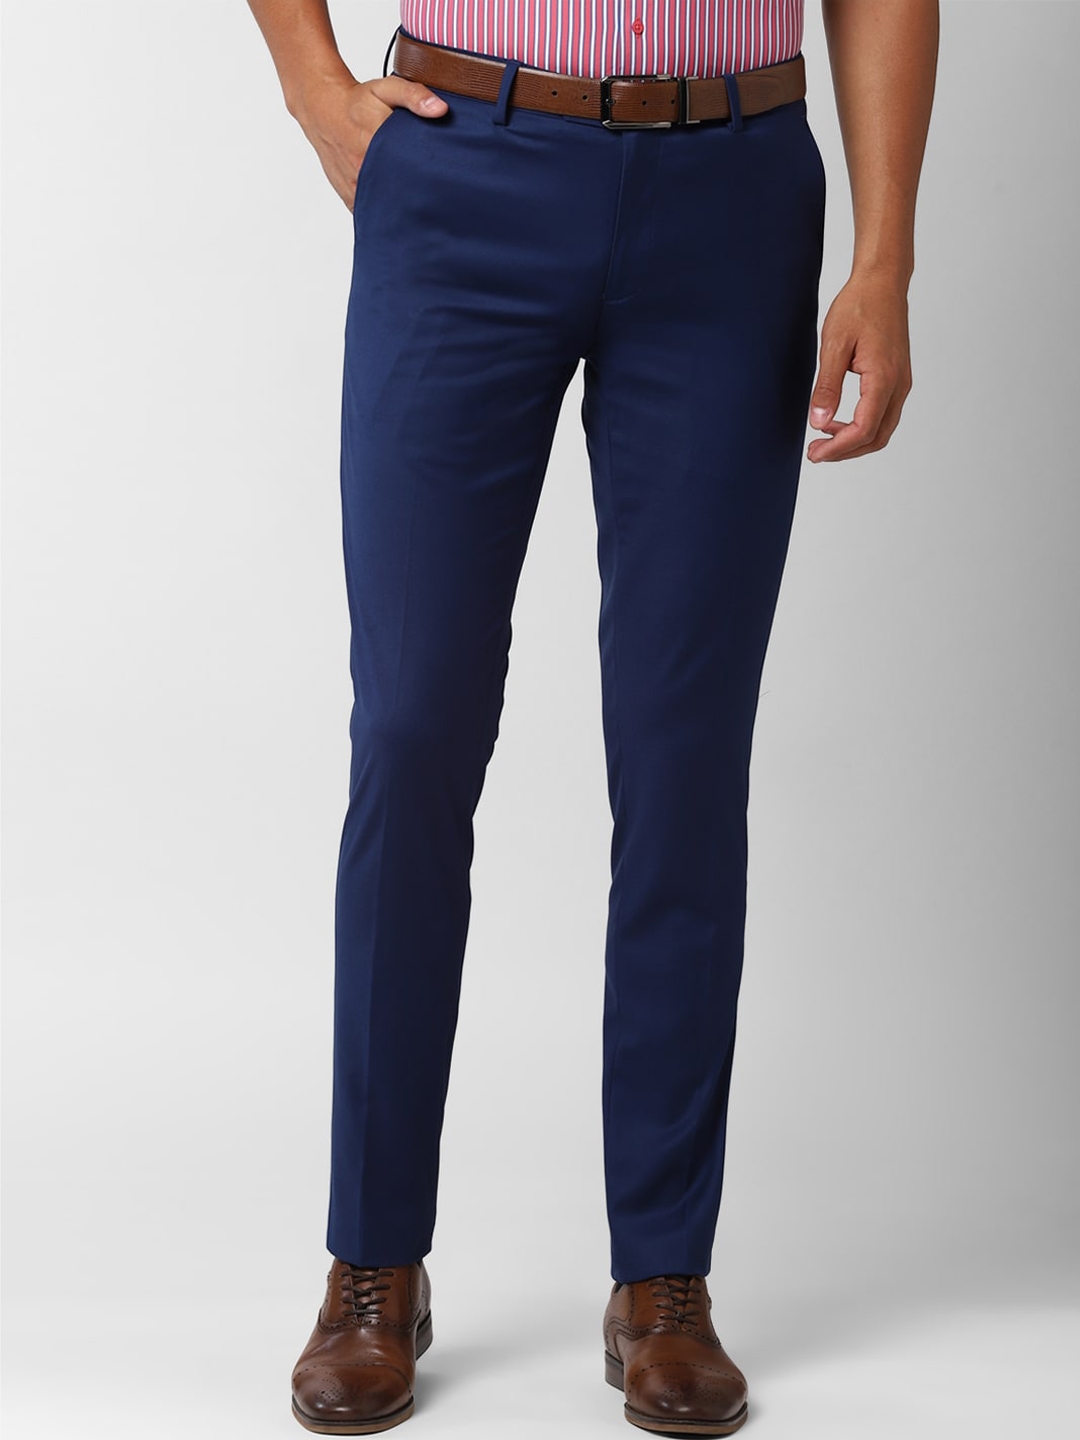 Buy Hiltl Dark Blue Formal Trousers Online  418712  The Collective